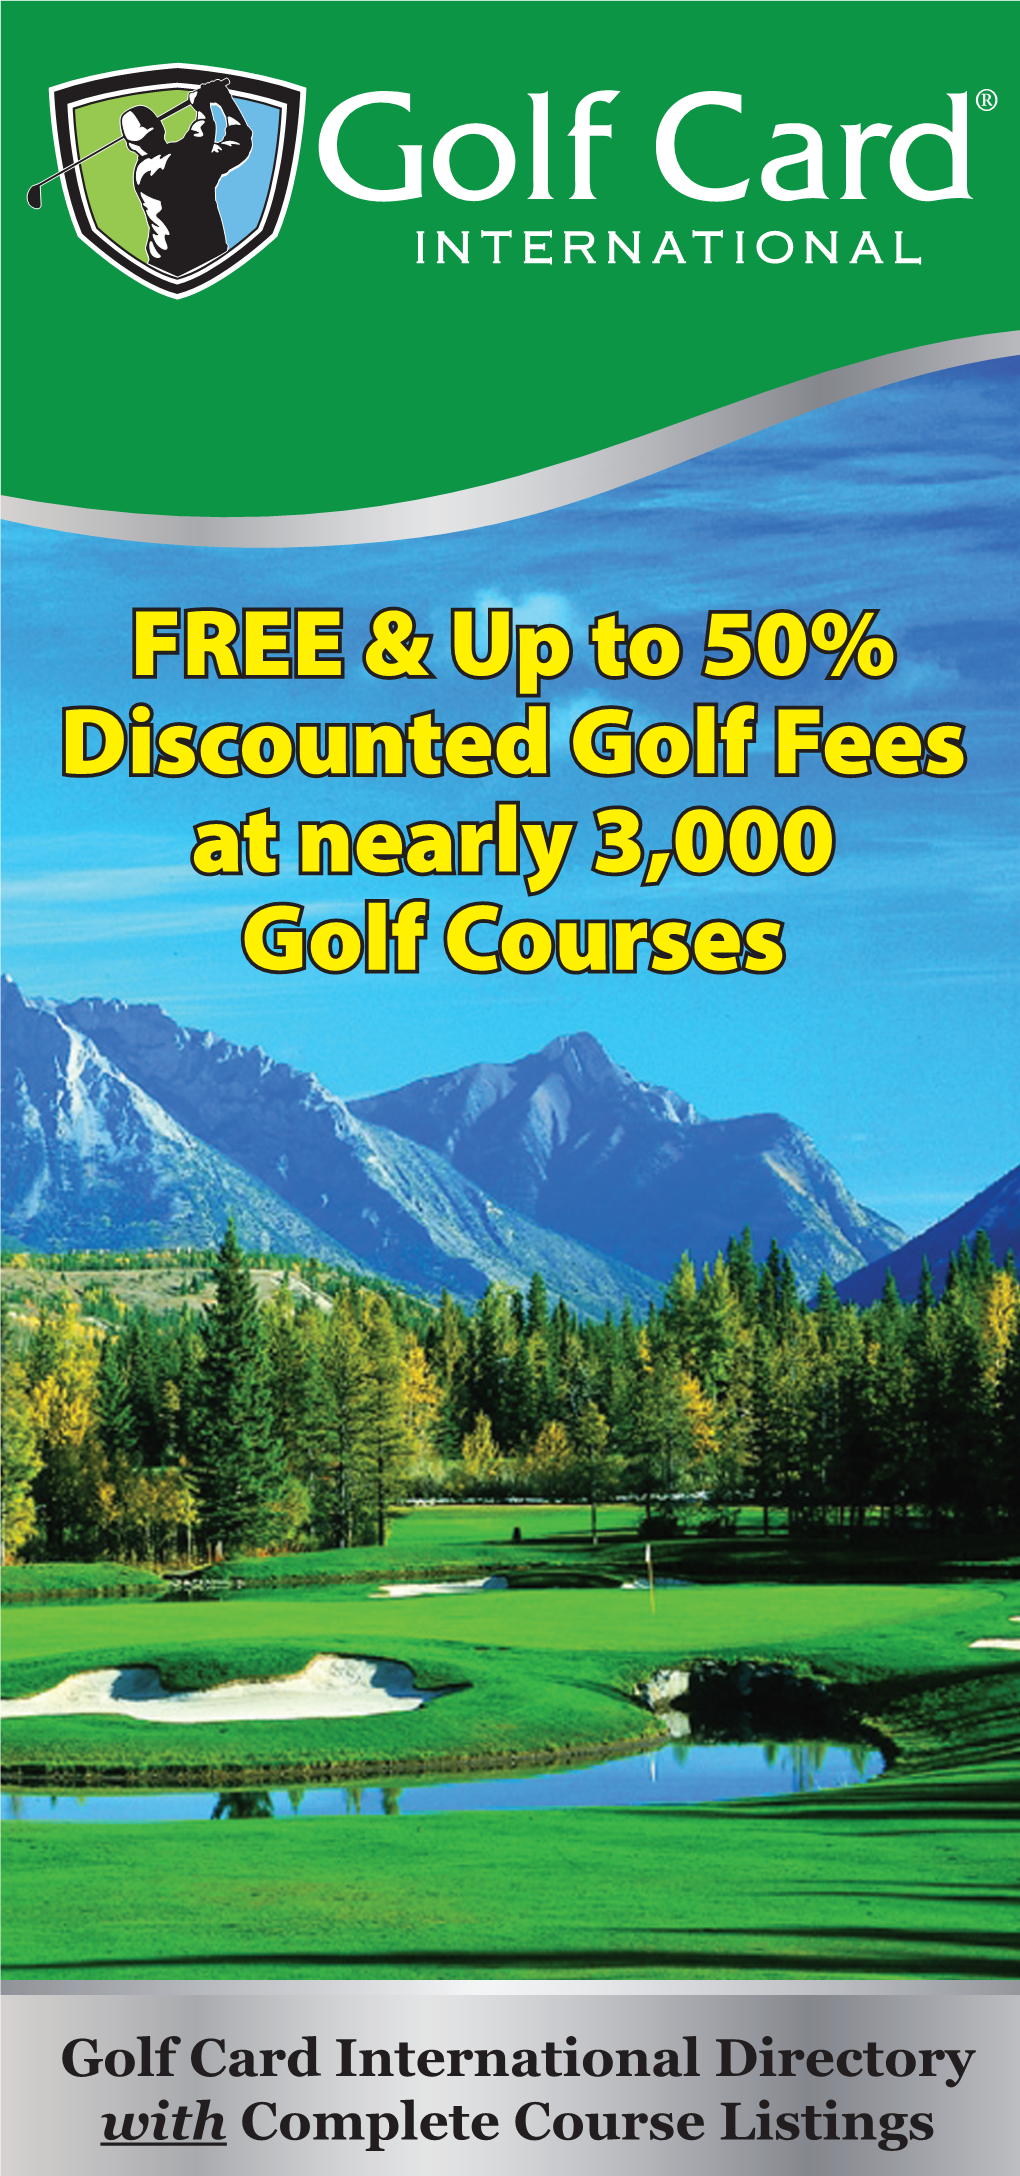 FREE & up to 50% Discounted Golf Fees at Nearly 3,000 Golf Courses